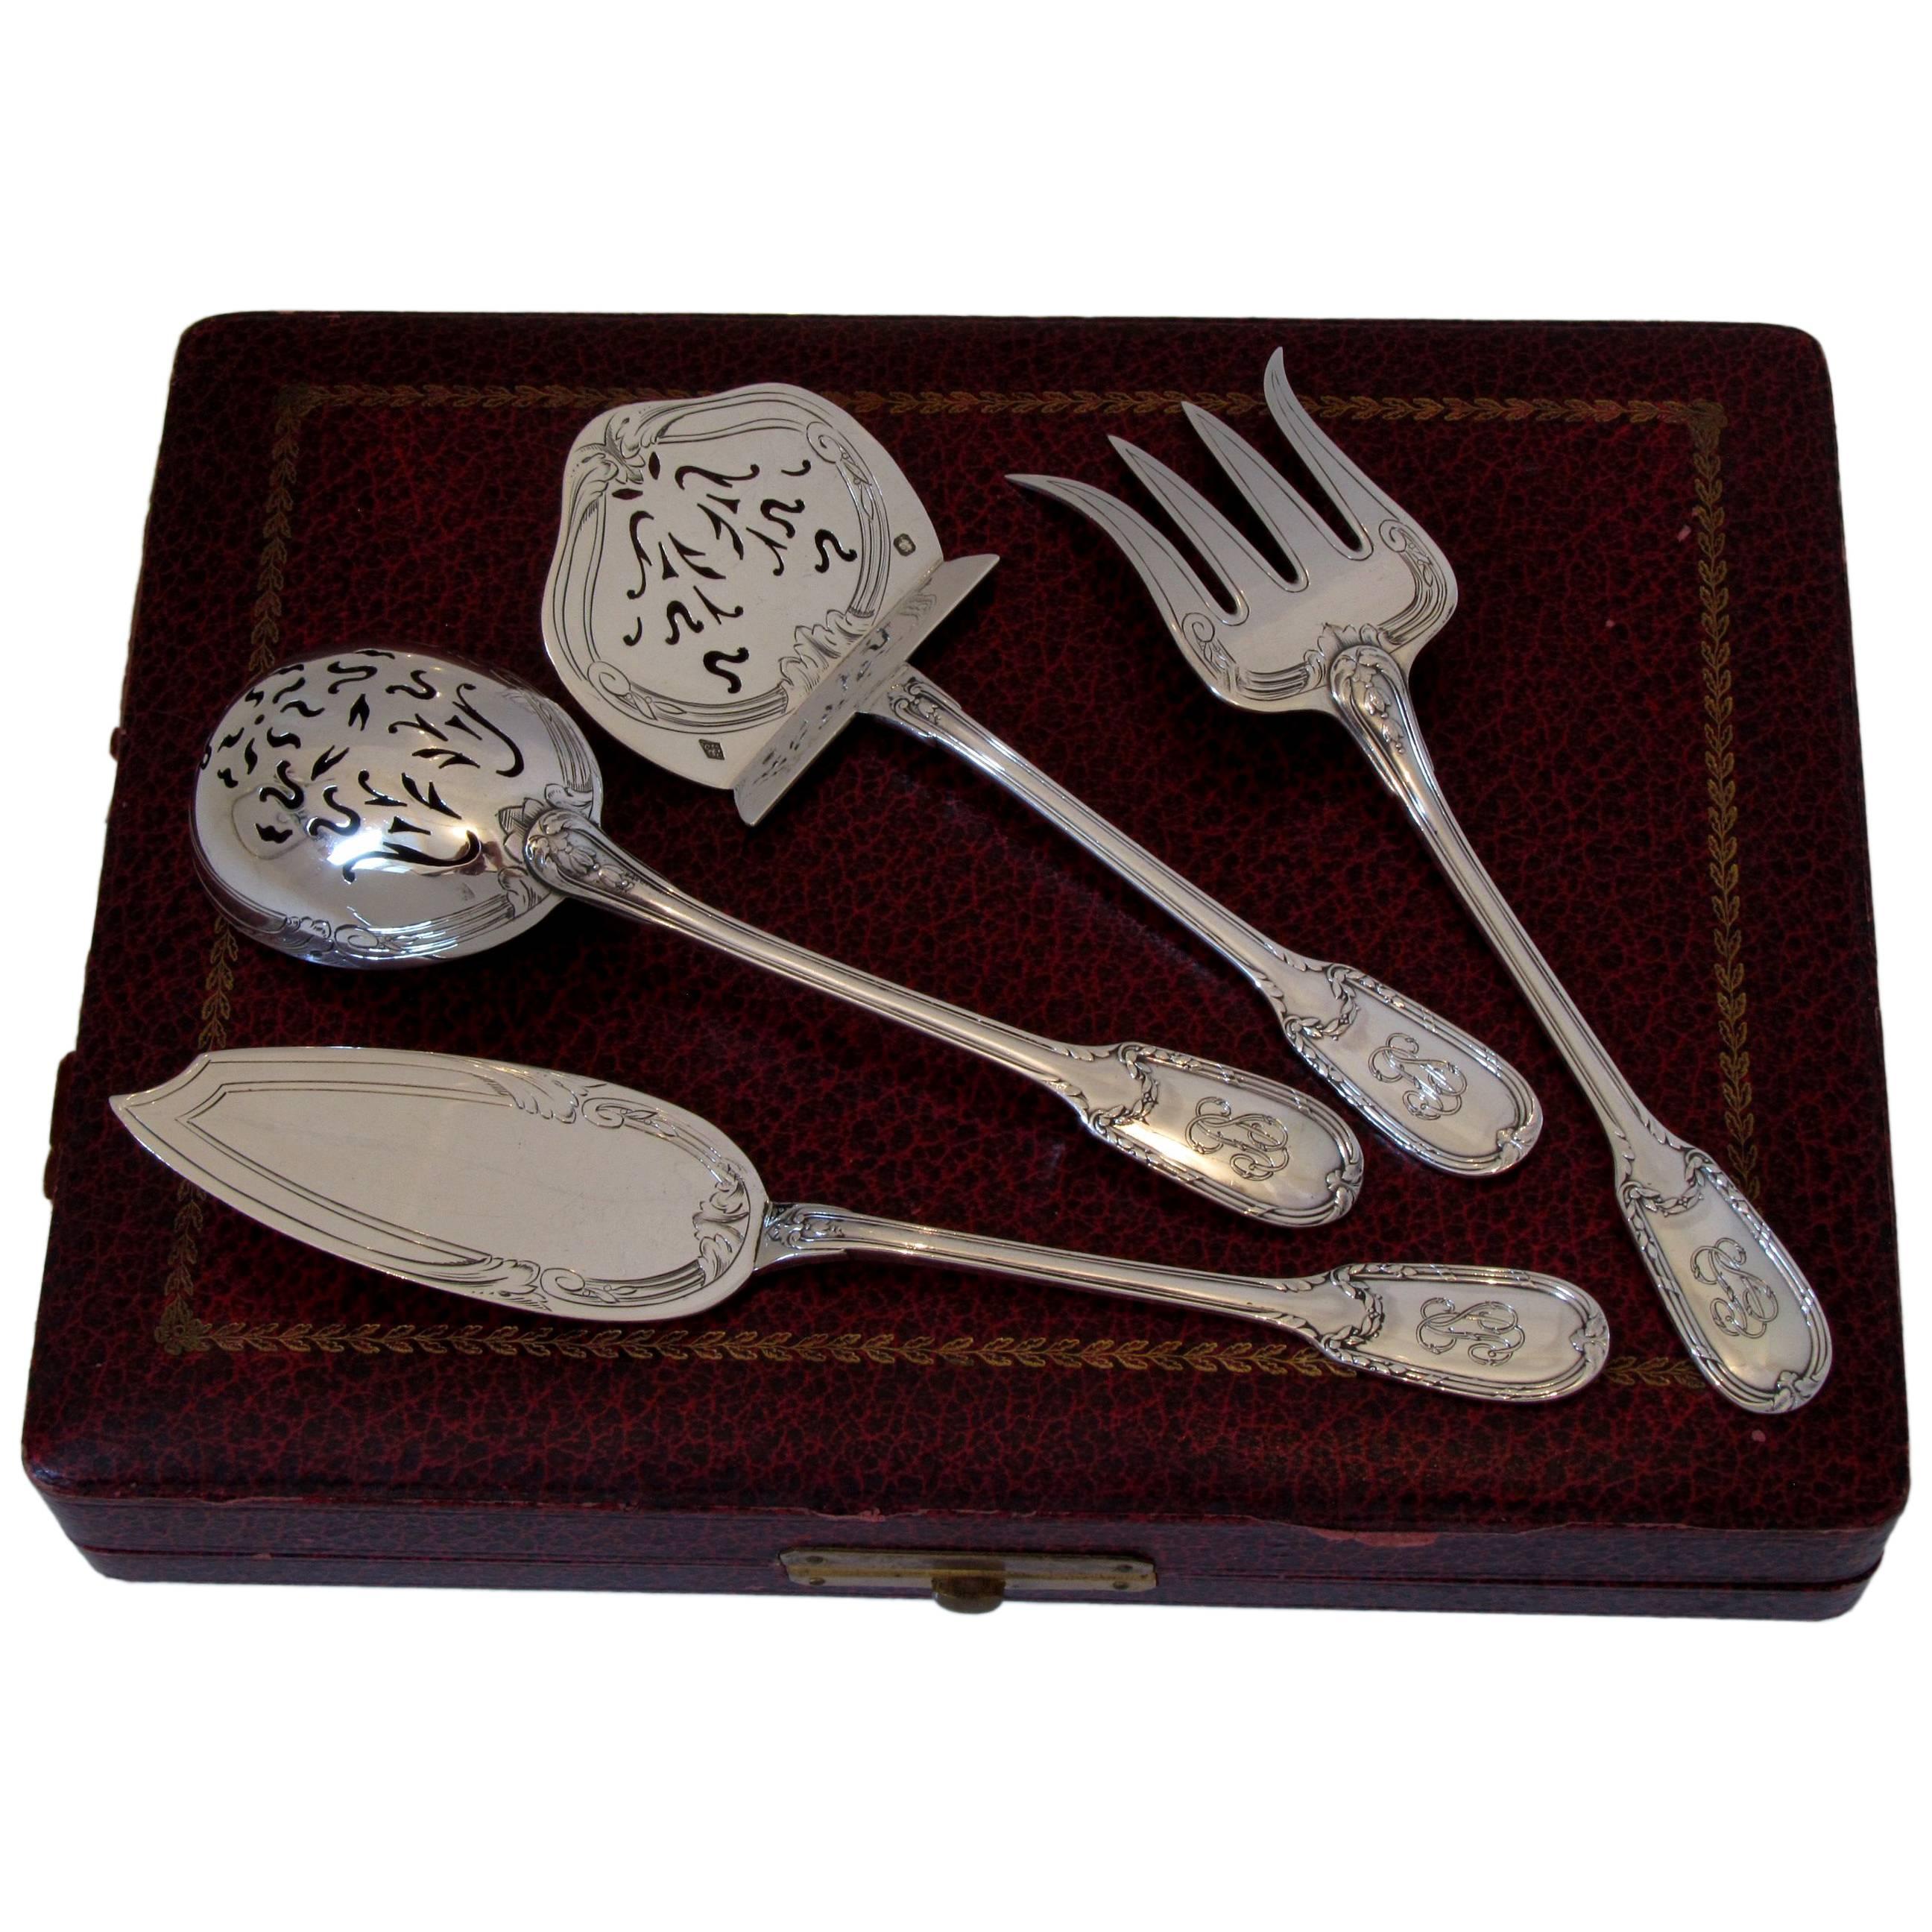 Christofle Rare French All Sterling Silver Dessert Hors D'oeuvre Set 4 pc box